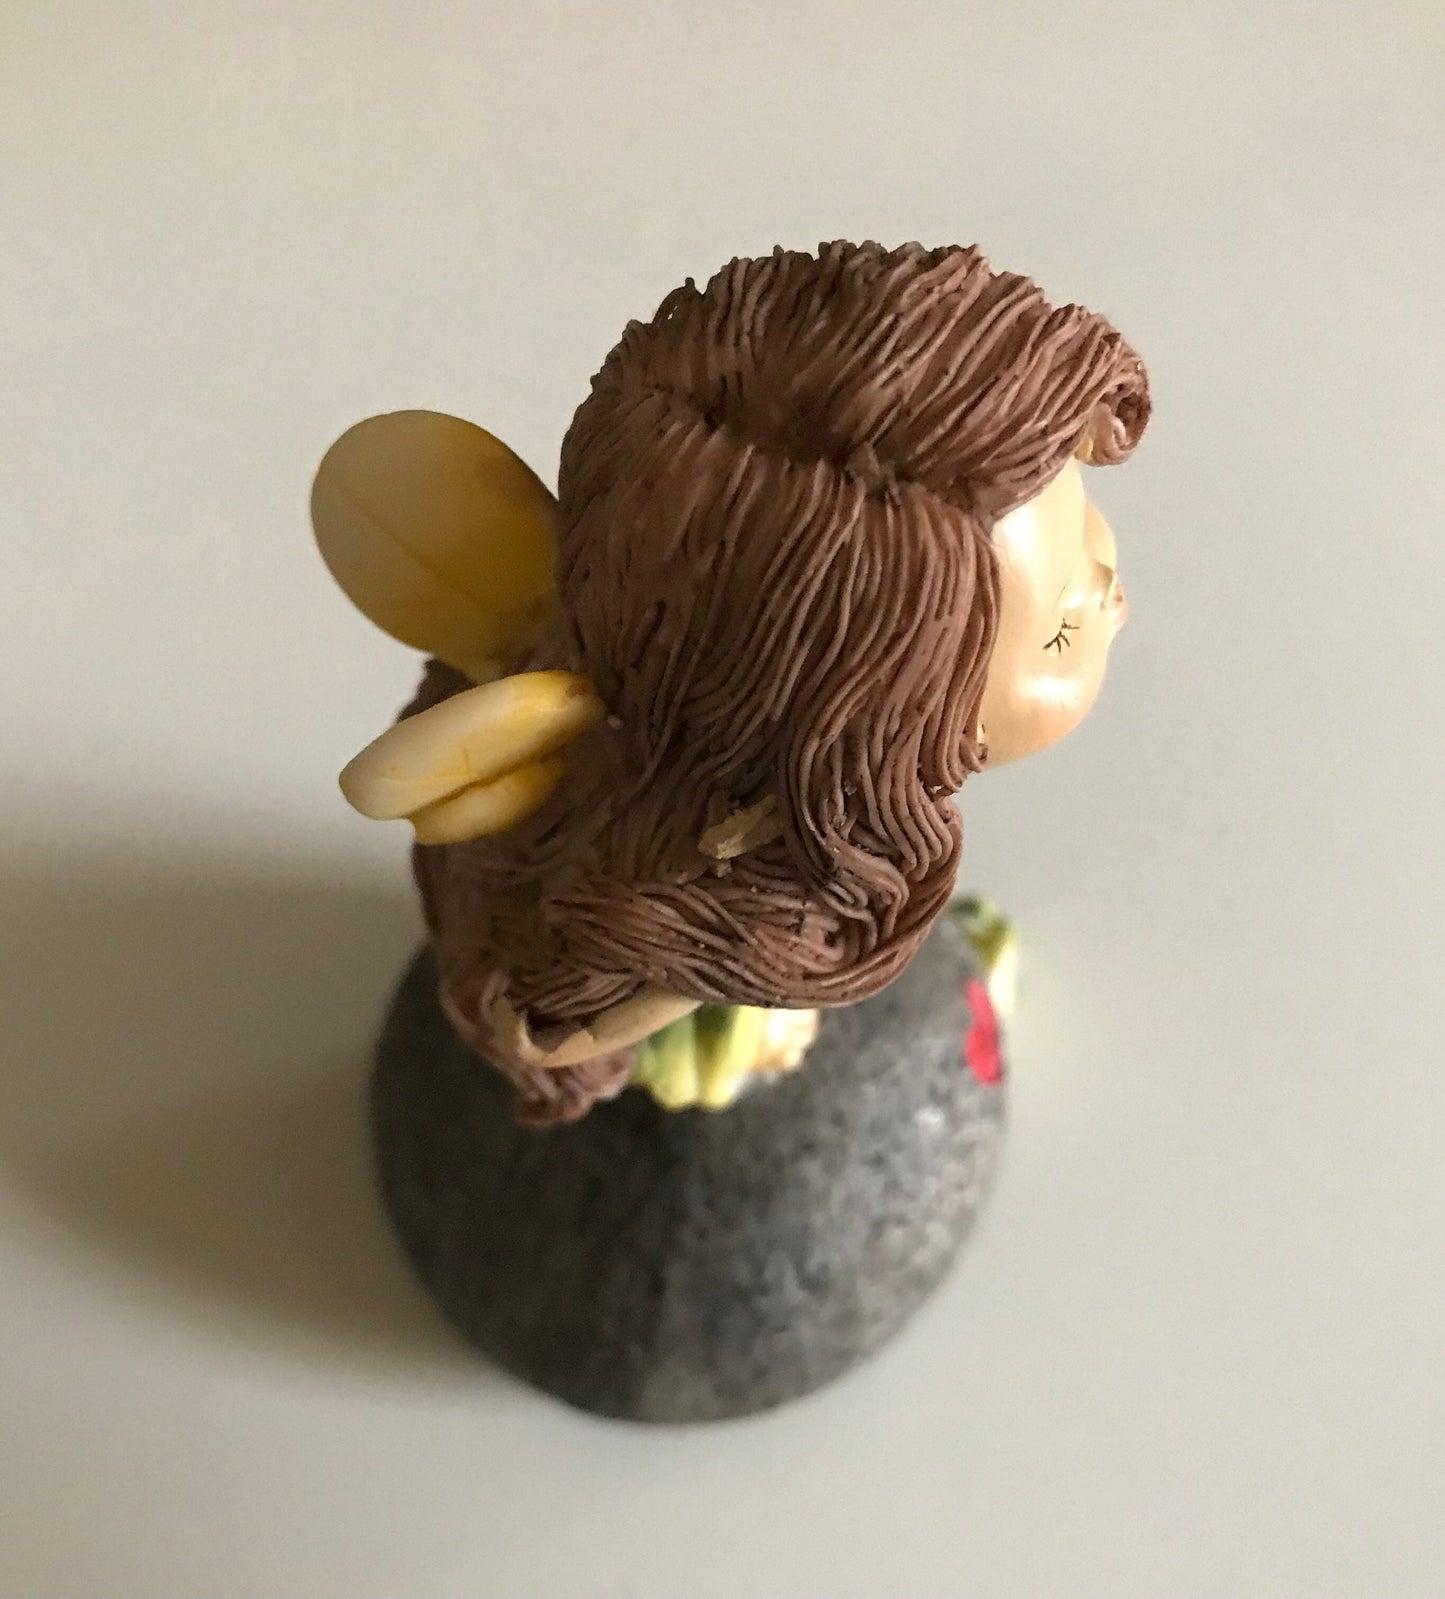 Adorable face little fairy with frog and heart on the stone fairy figurine fairy garden supplies